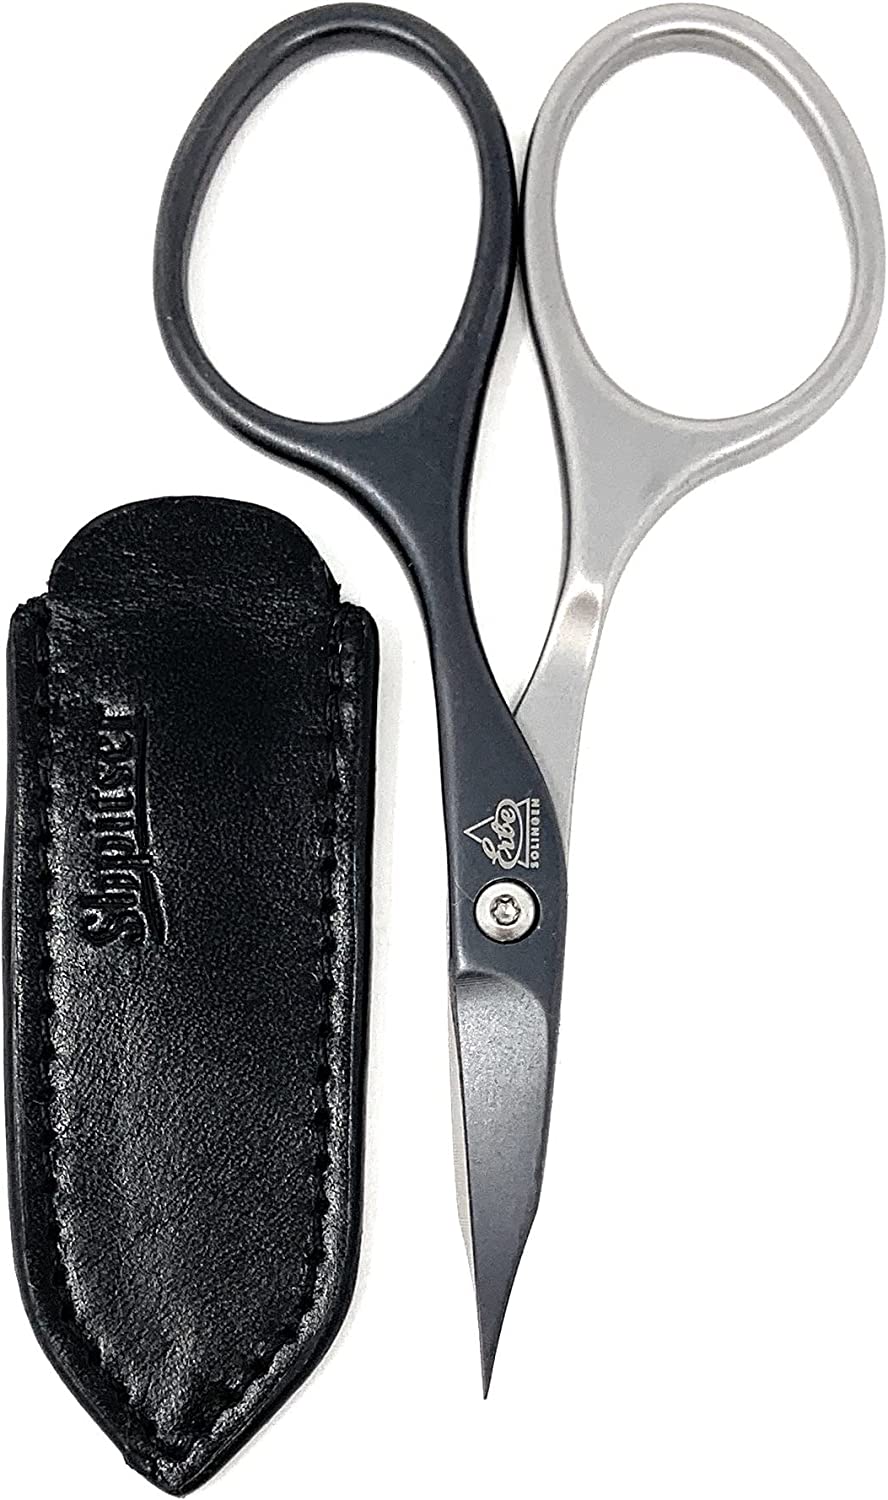  marQus Solingen INOX Titanium self sharpening Nail and Cuticle  Scissors, fine, curved and sharp in handy case Precision Scissors, Nail  Scissors Germany - Pedicure Beauty Grooming Kit for Nail, Eyebrow 